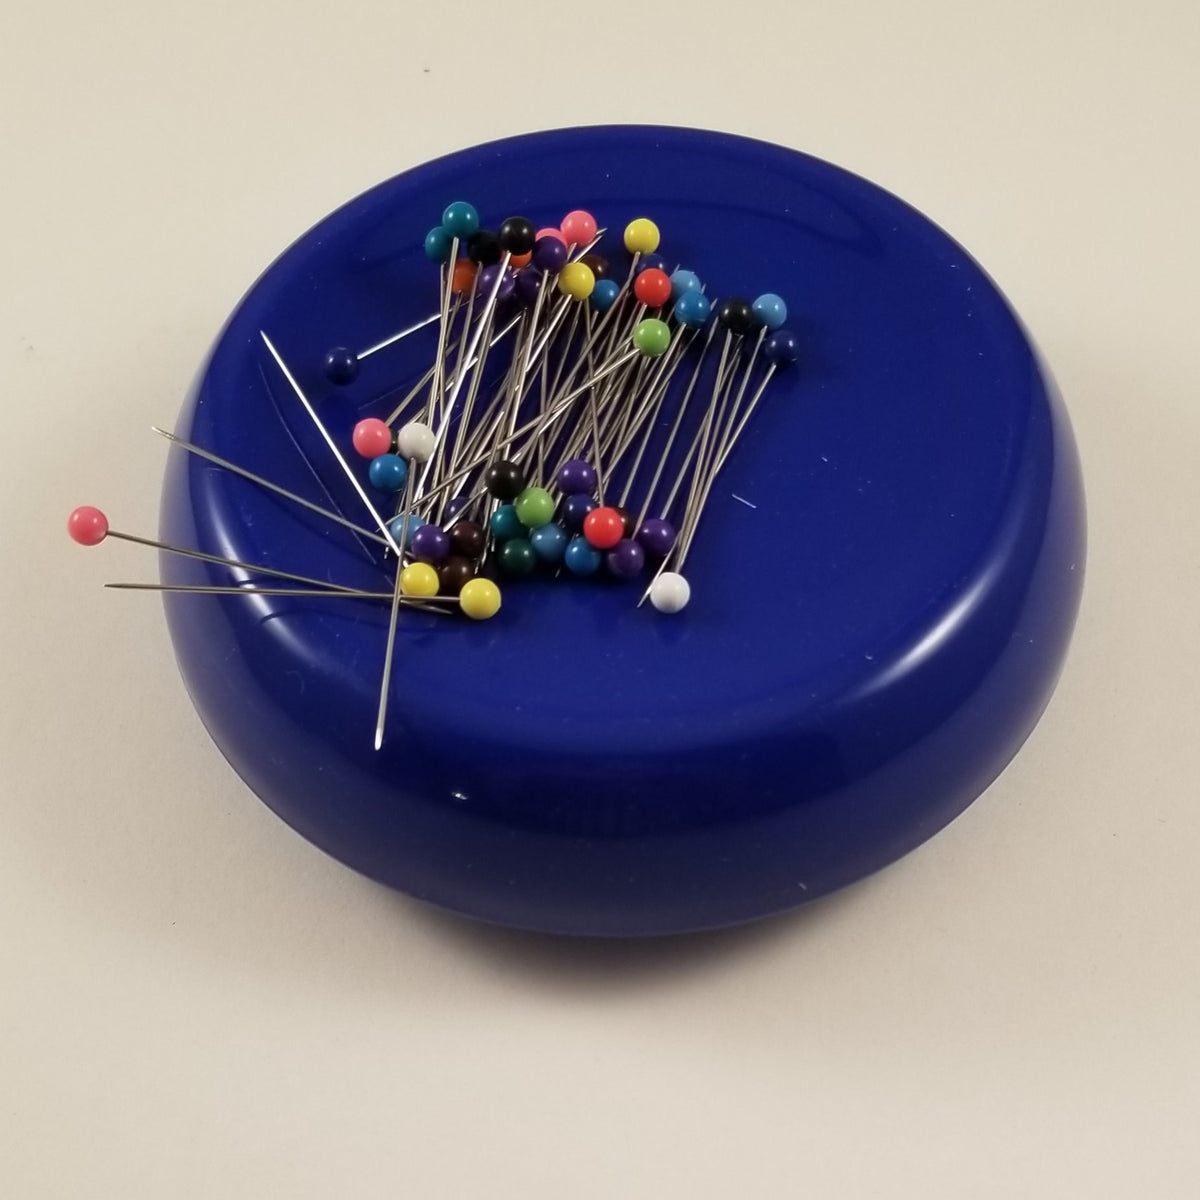 Magnetic Pin Cushion - Available in Two Colors: Lime Green or Purple…You  Choose!